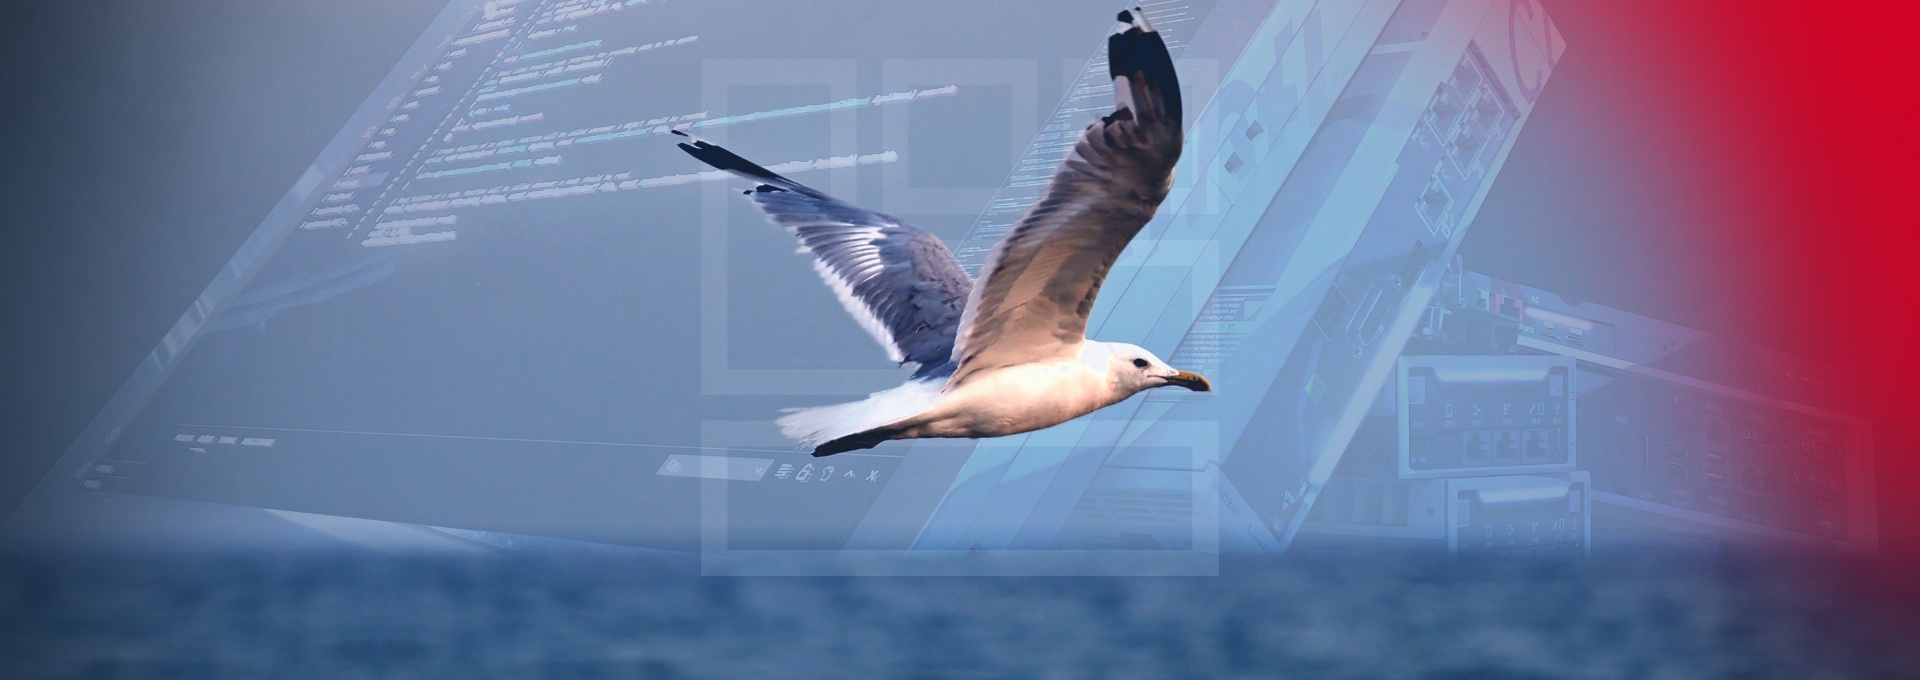 Seagull flying over the sea. In the background are indicated ctrlX AUTOMATION components.